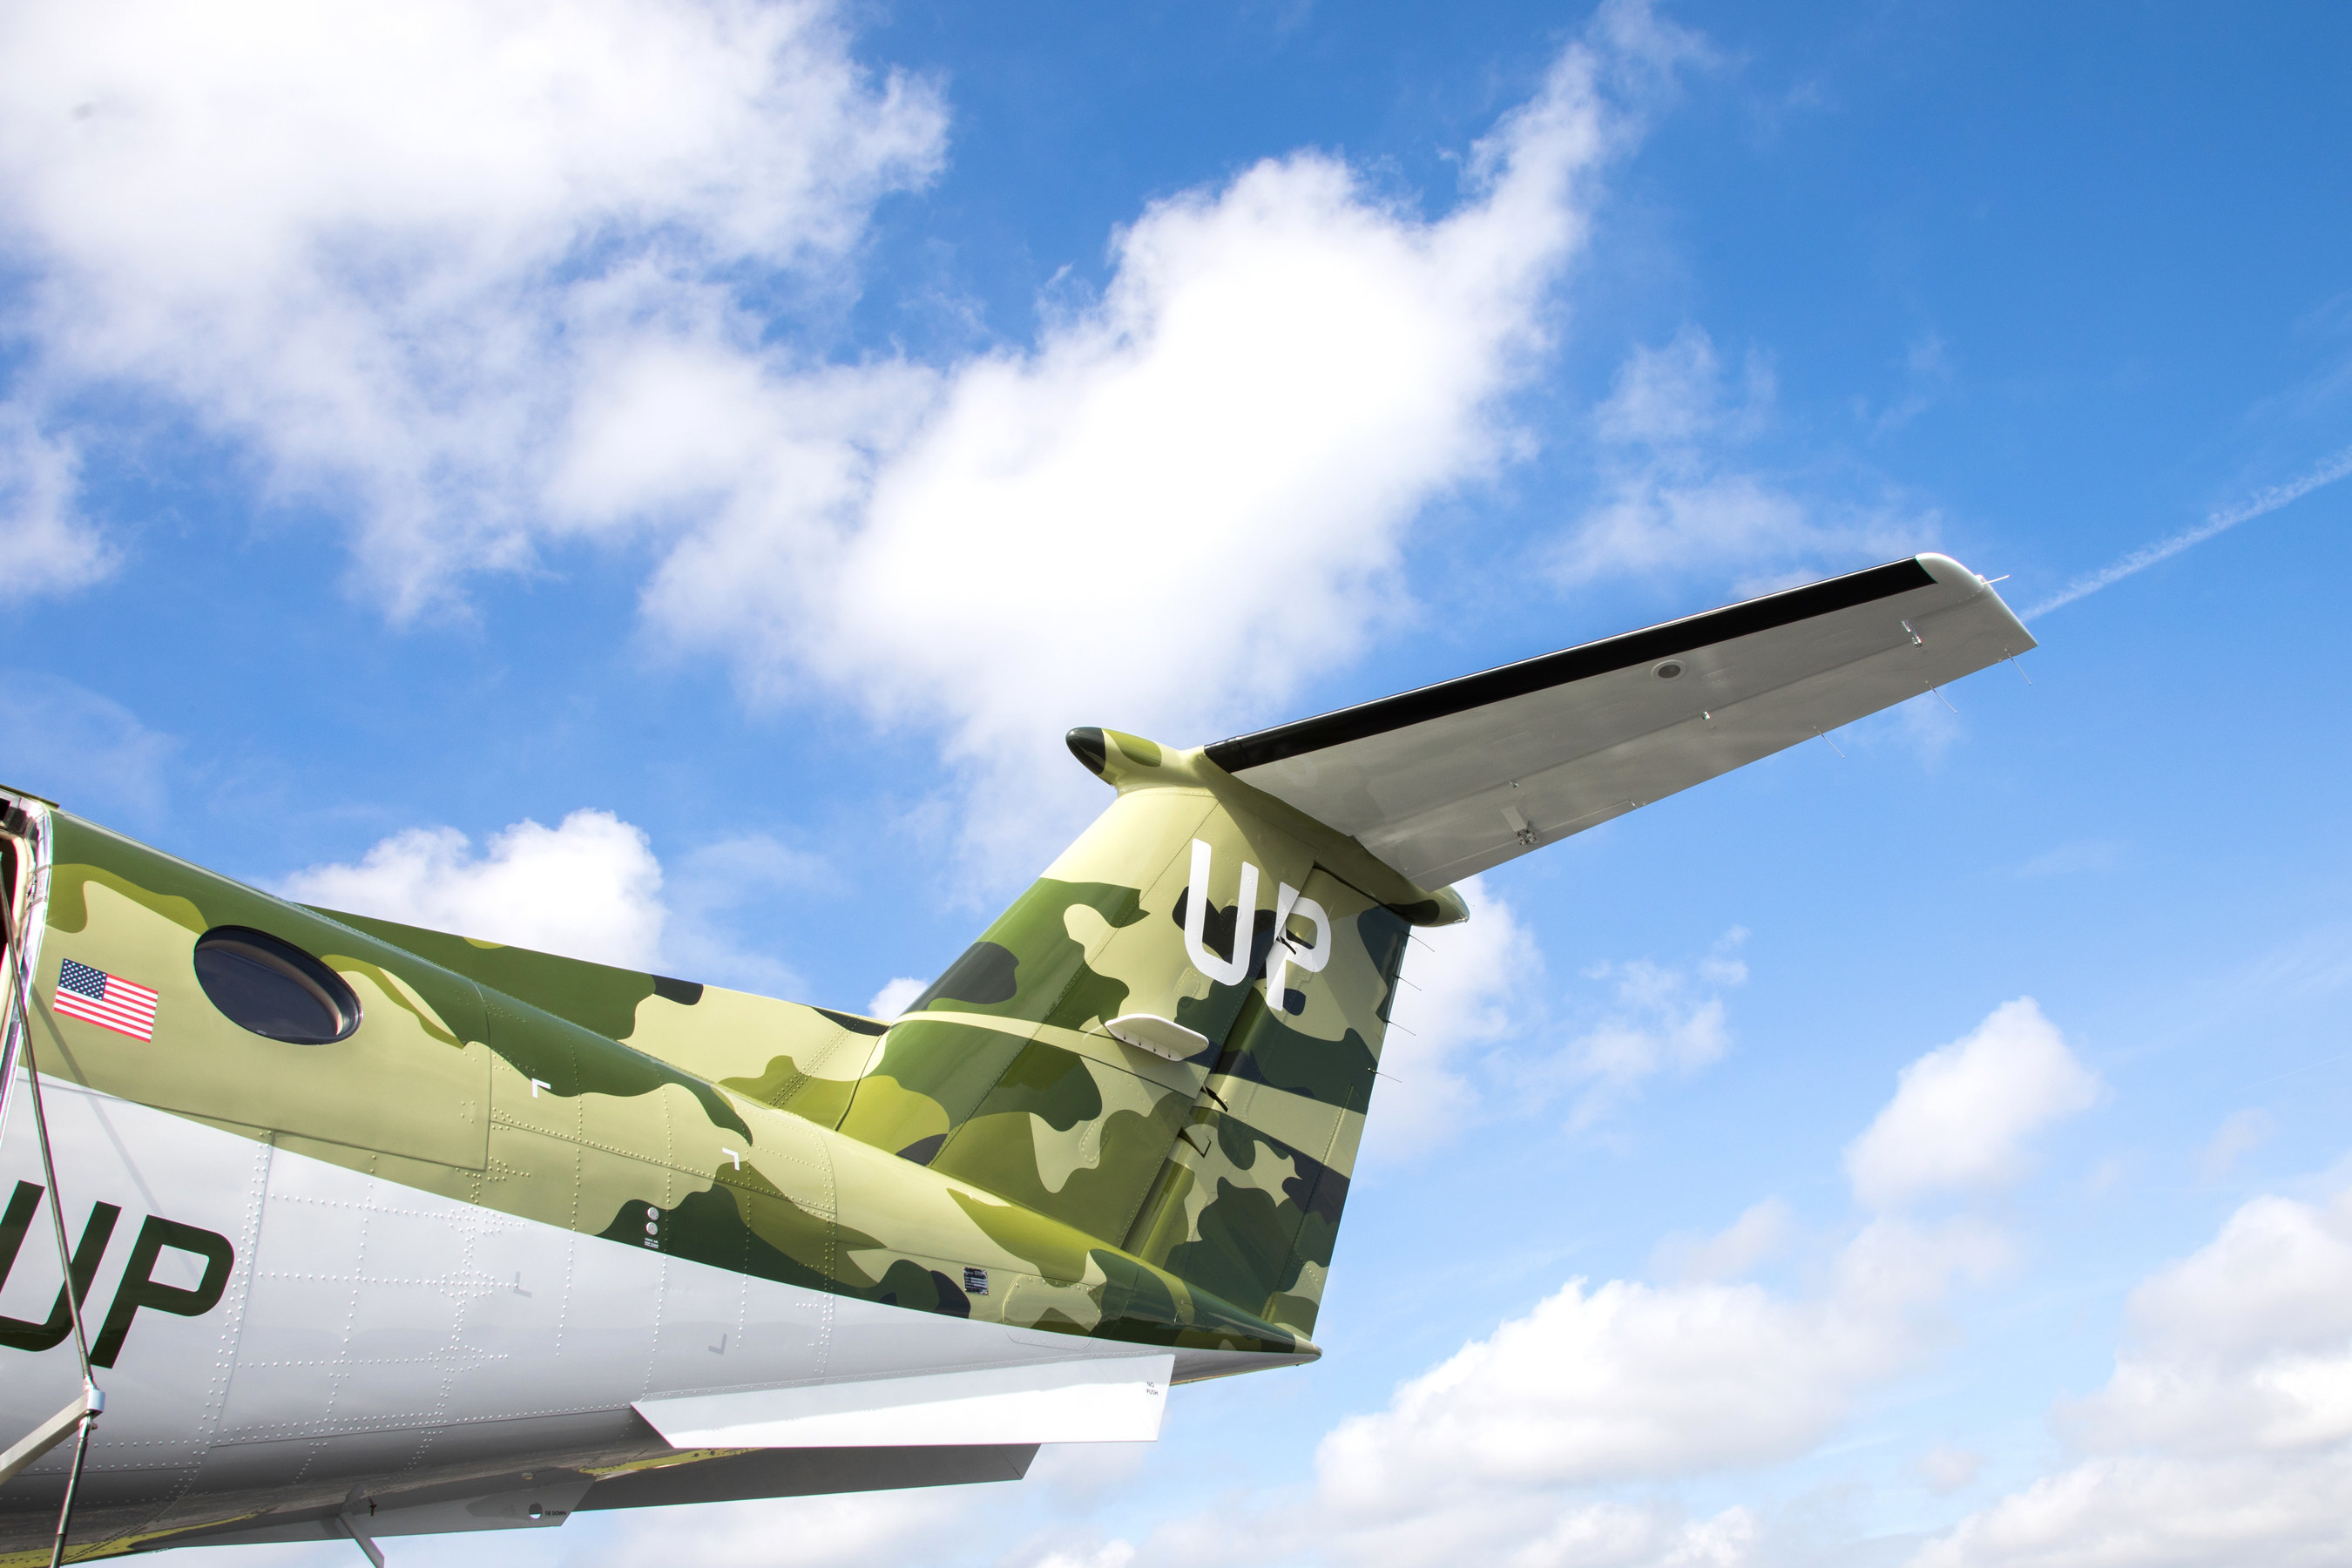 Wheels Up Adds Camouflage King Air 350i Aircraft To Wheels Up Cares Fleet Honoring Those In The Military Who Bravely Served And Continue To Serve Their Country